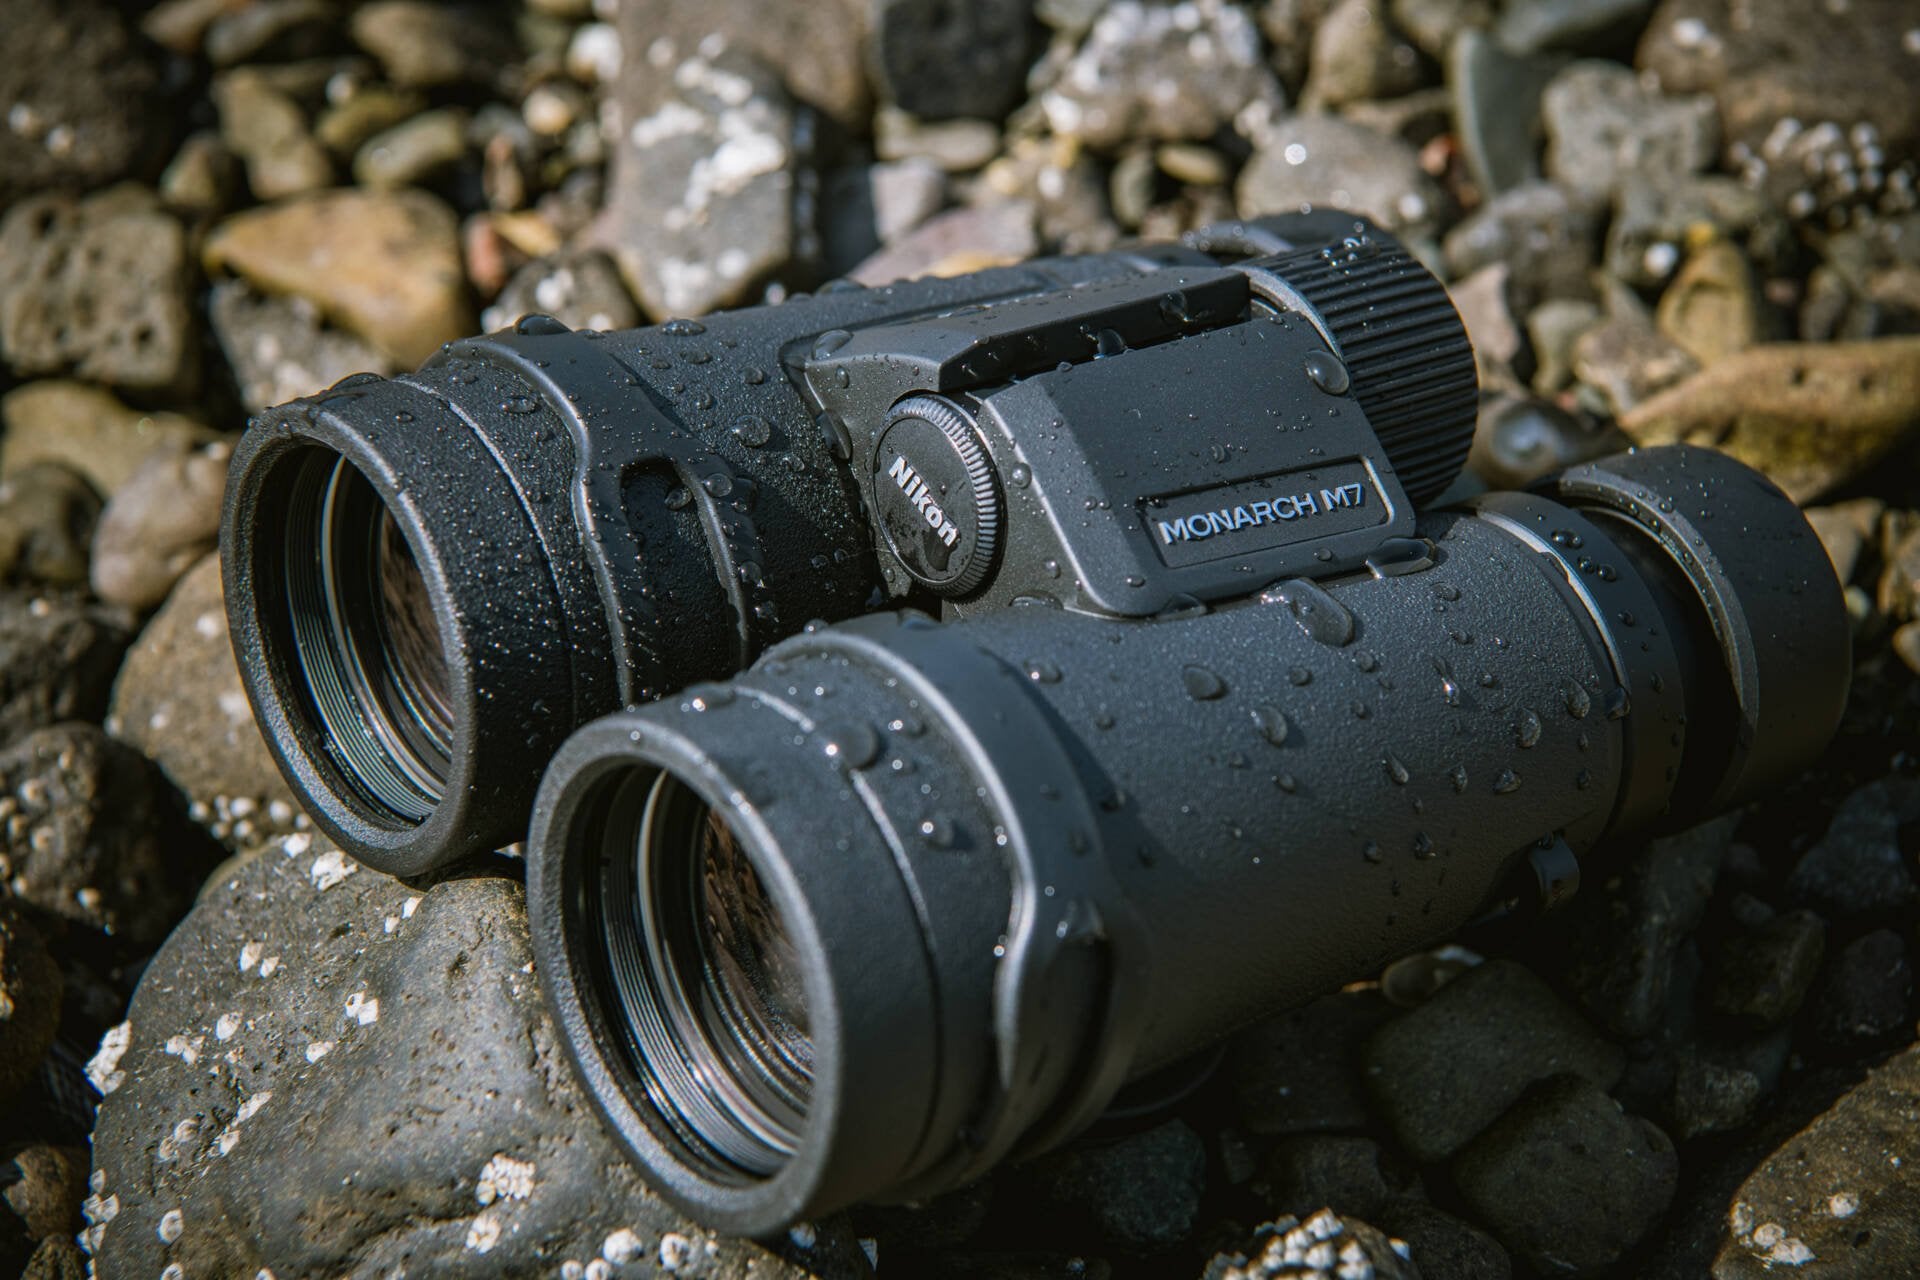 Photo of the binoculars covered in water to illustrate their durability